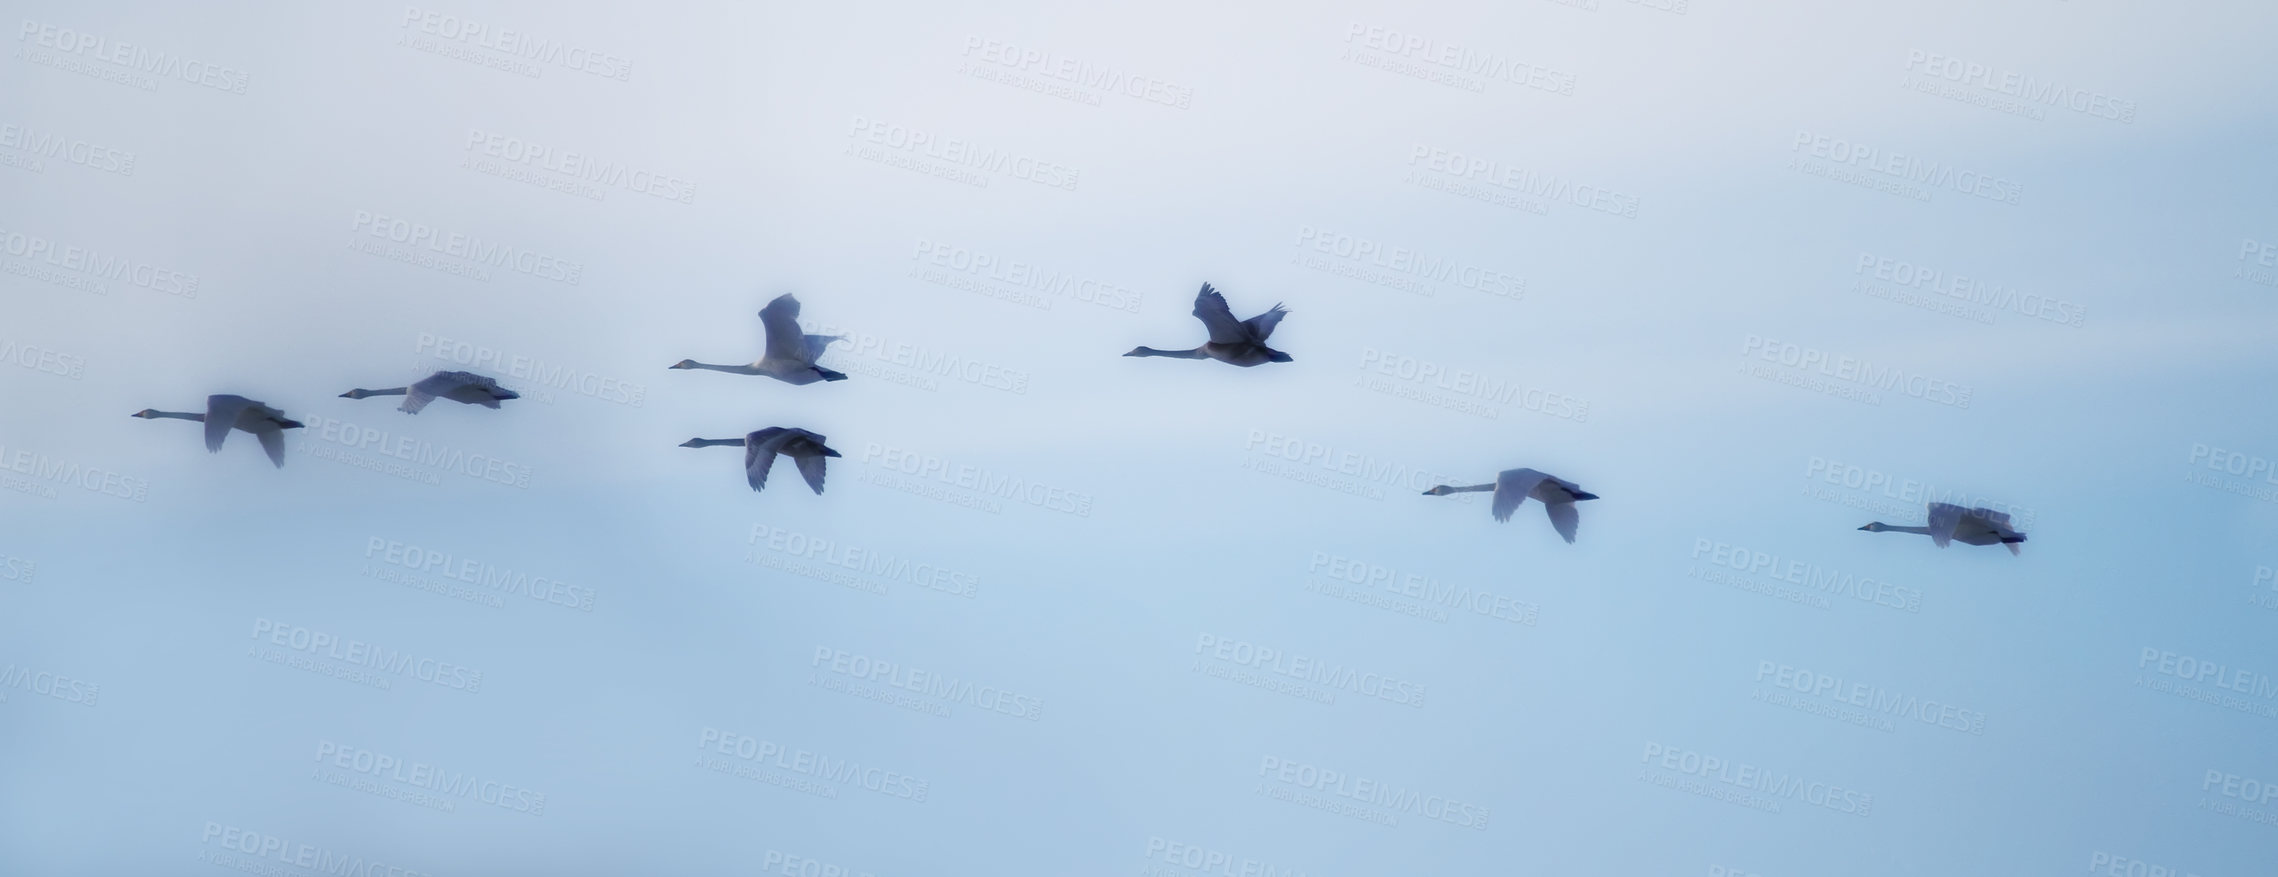 Buy stock photo Swans flying in close formation - sky as background